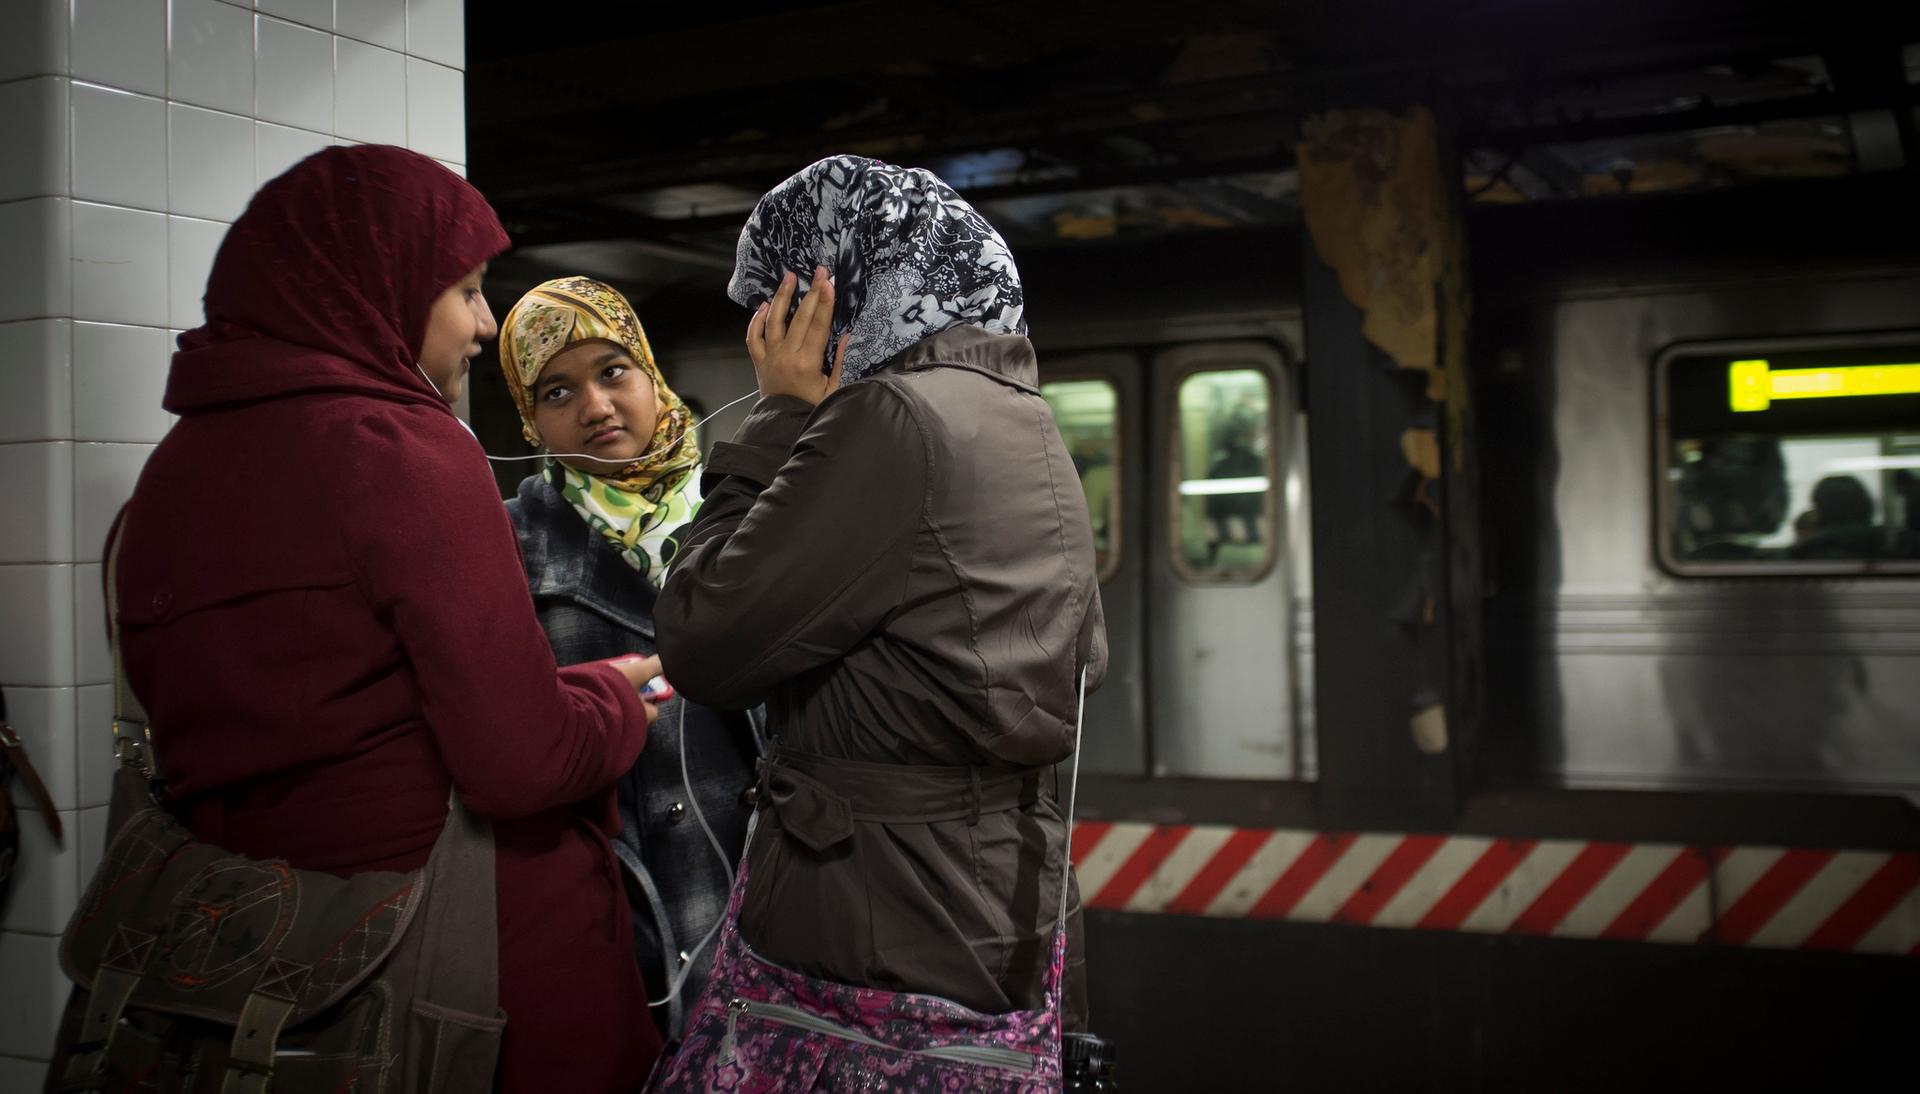 Three women wearing hijab, the headscarf worn by some Muslim women, on a platform in the New York City subway. Australians feared that Muslims on public transportation would be harassed following the Sydney hostage crisis.